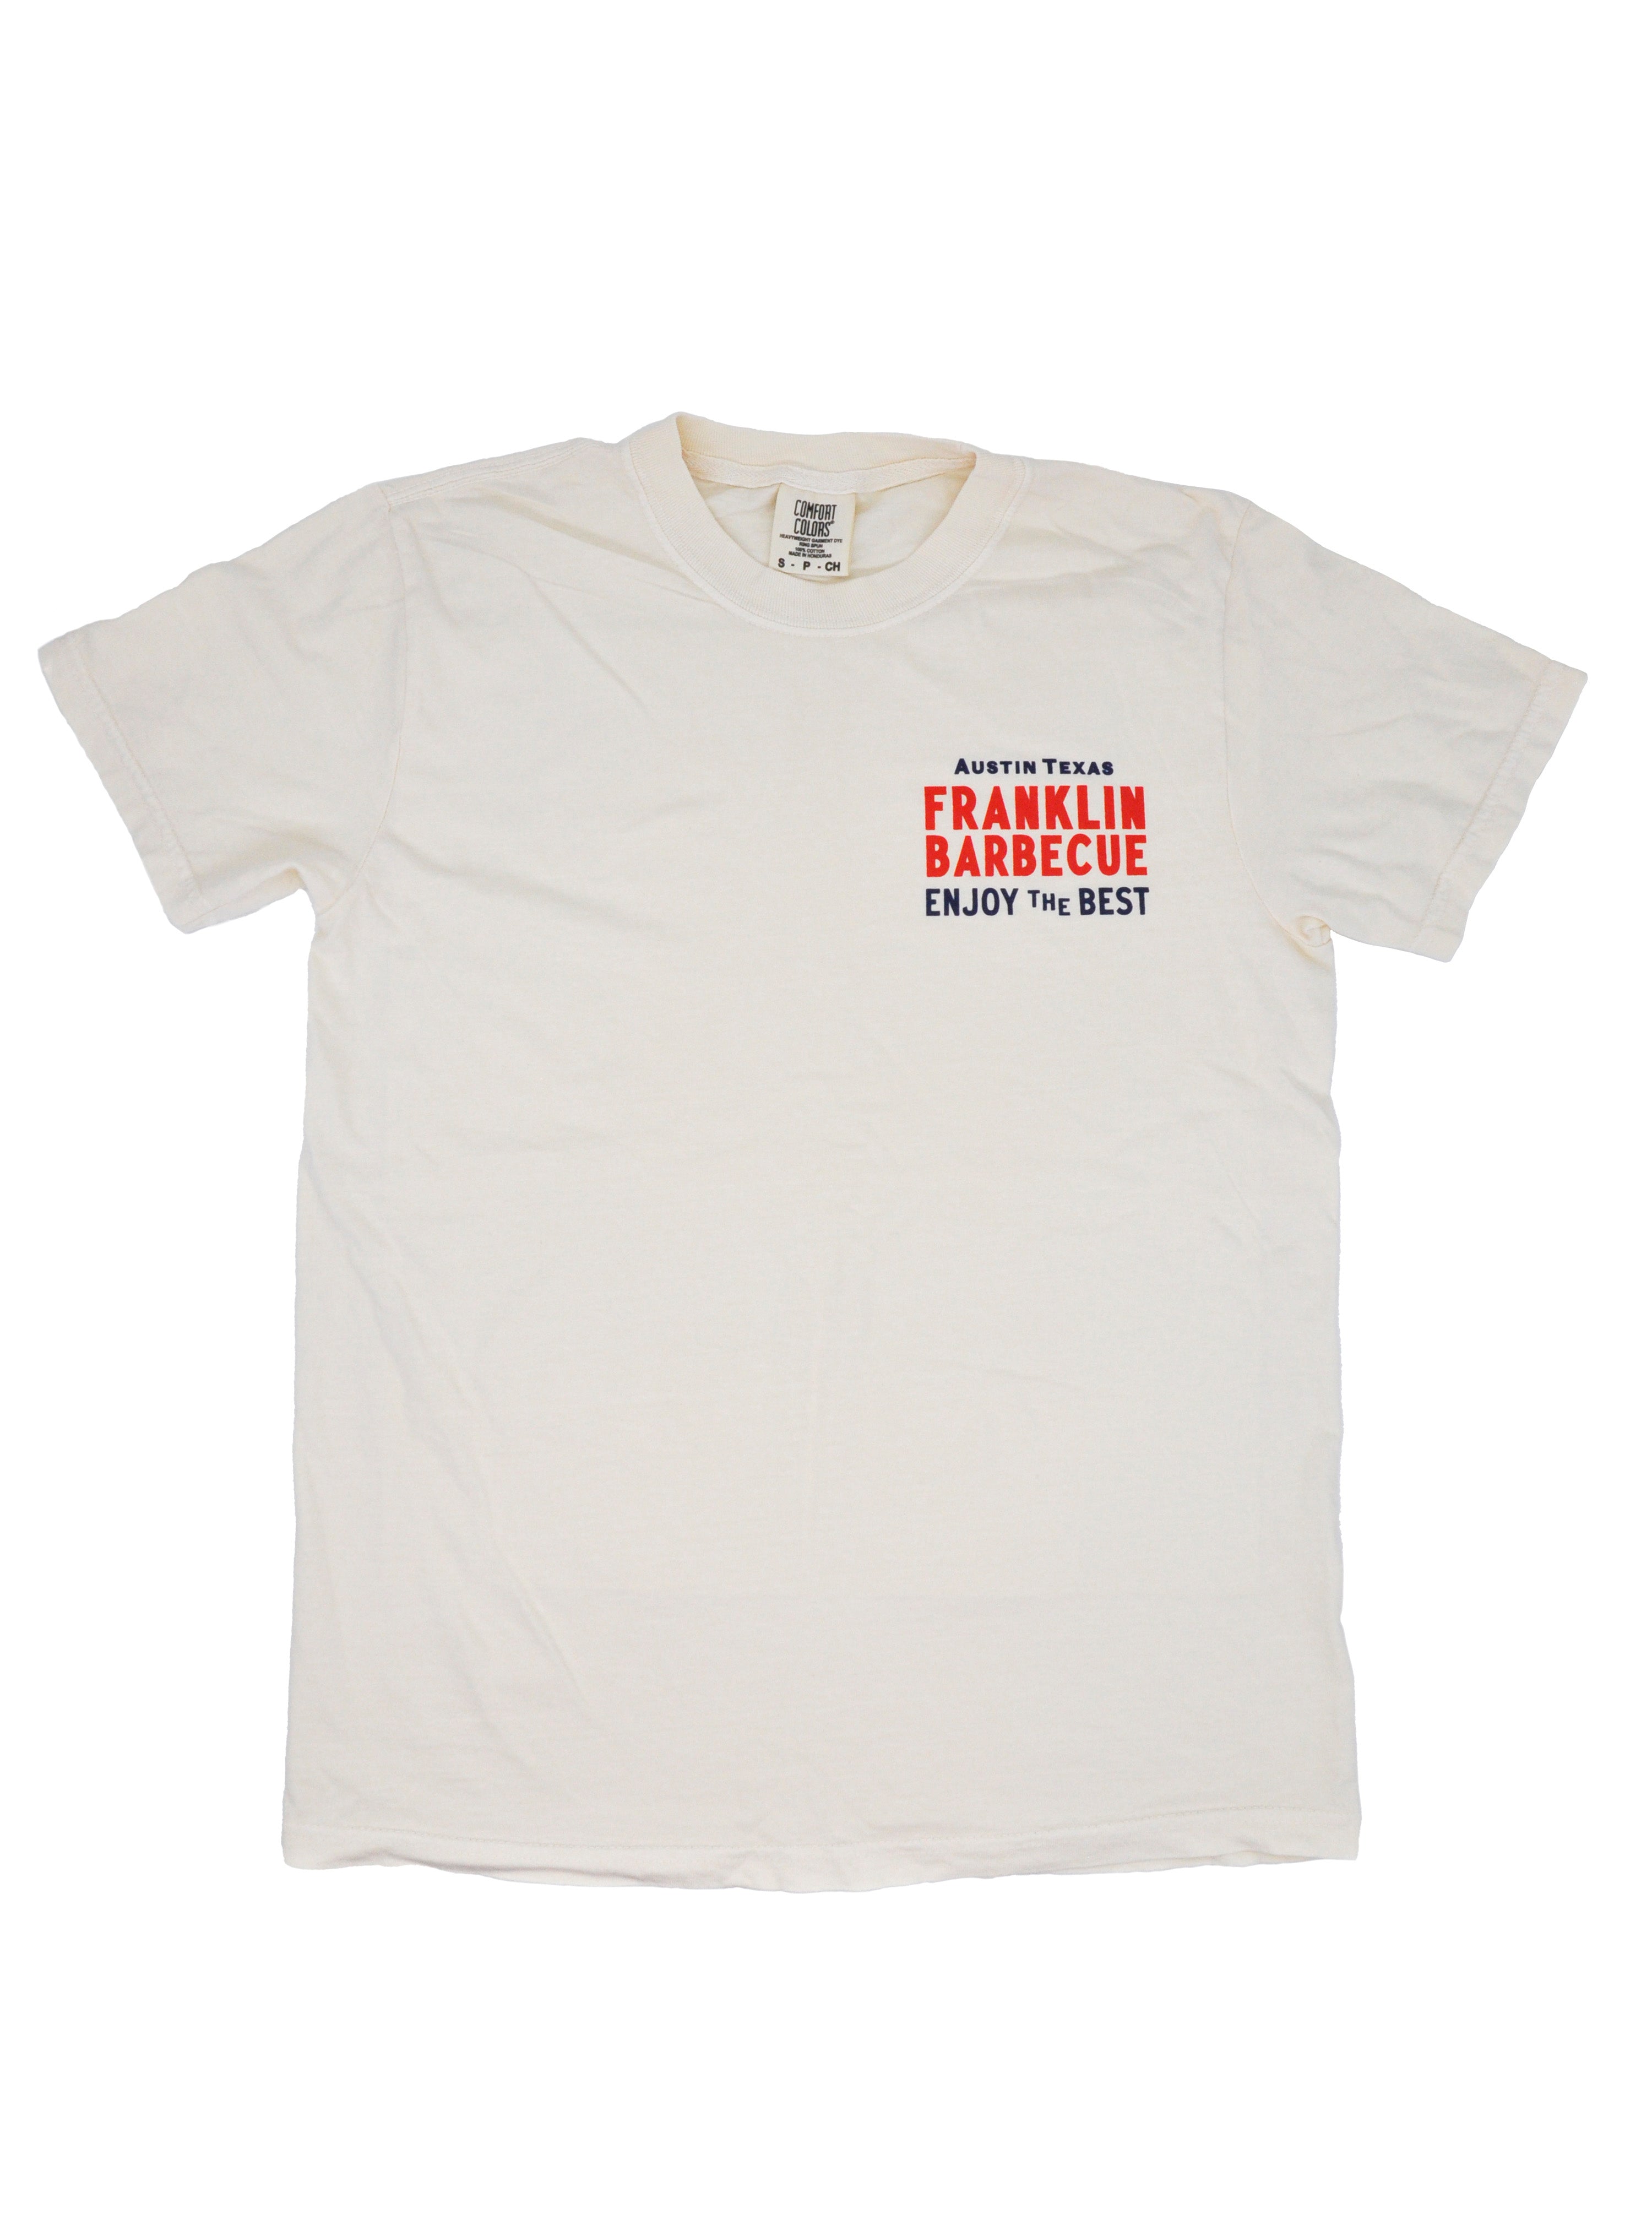 Front side of a cream t-shirt. On the shirt's top left it says in blue and red letters "Austin, TX. Franklin Barbecue. Enjoy the best."